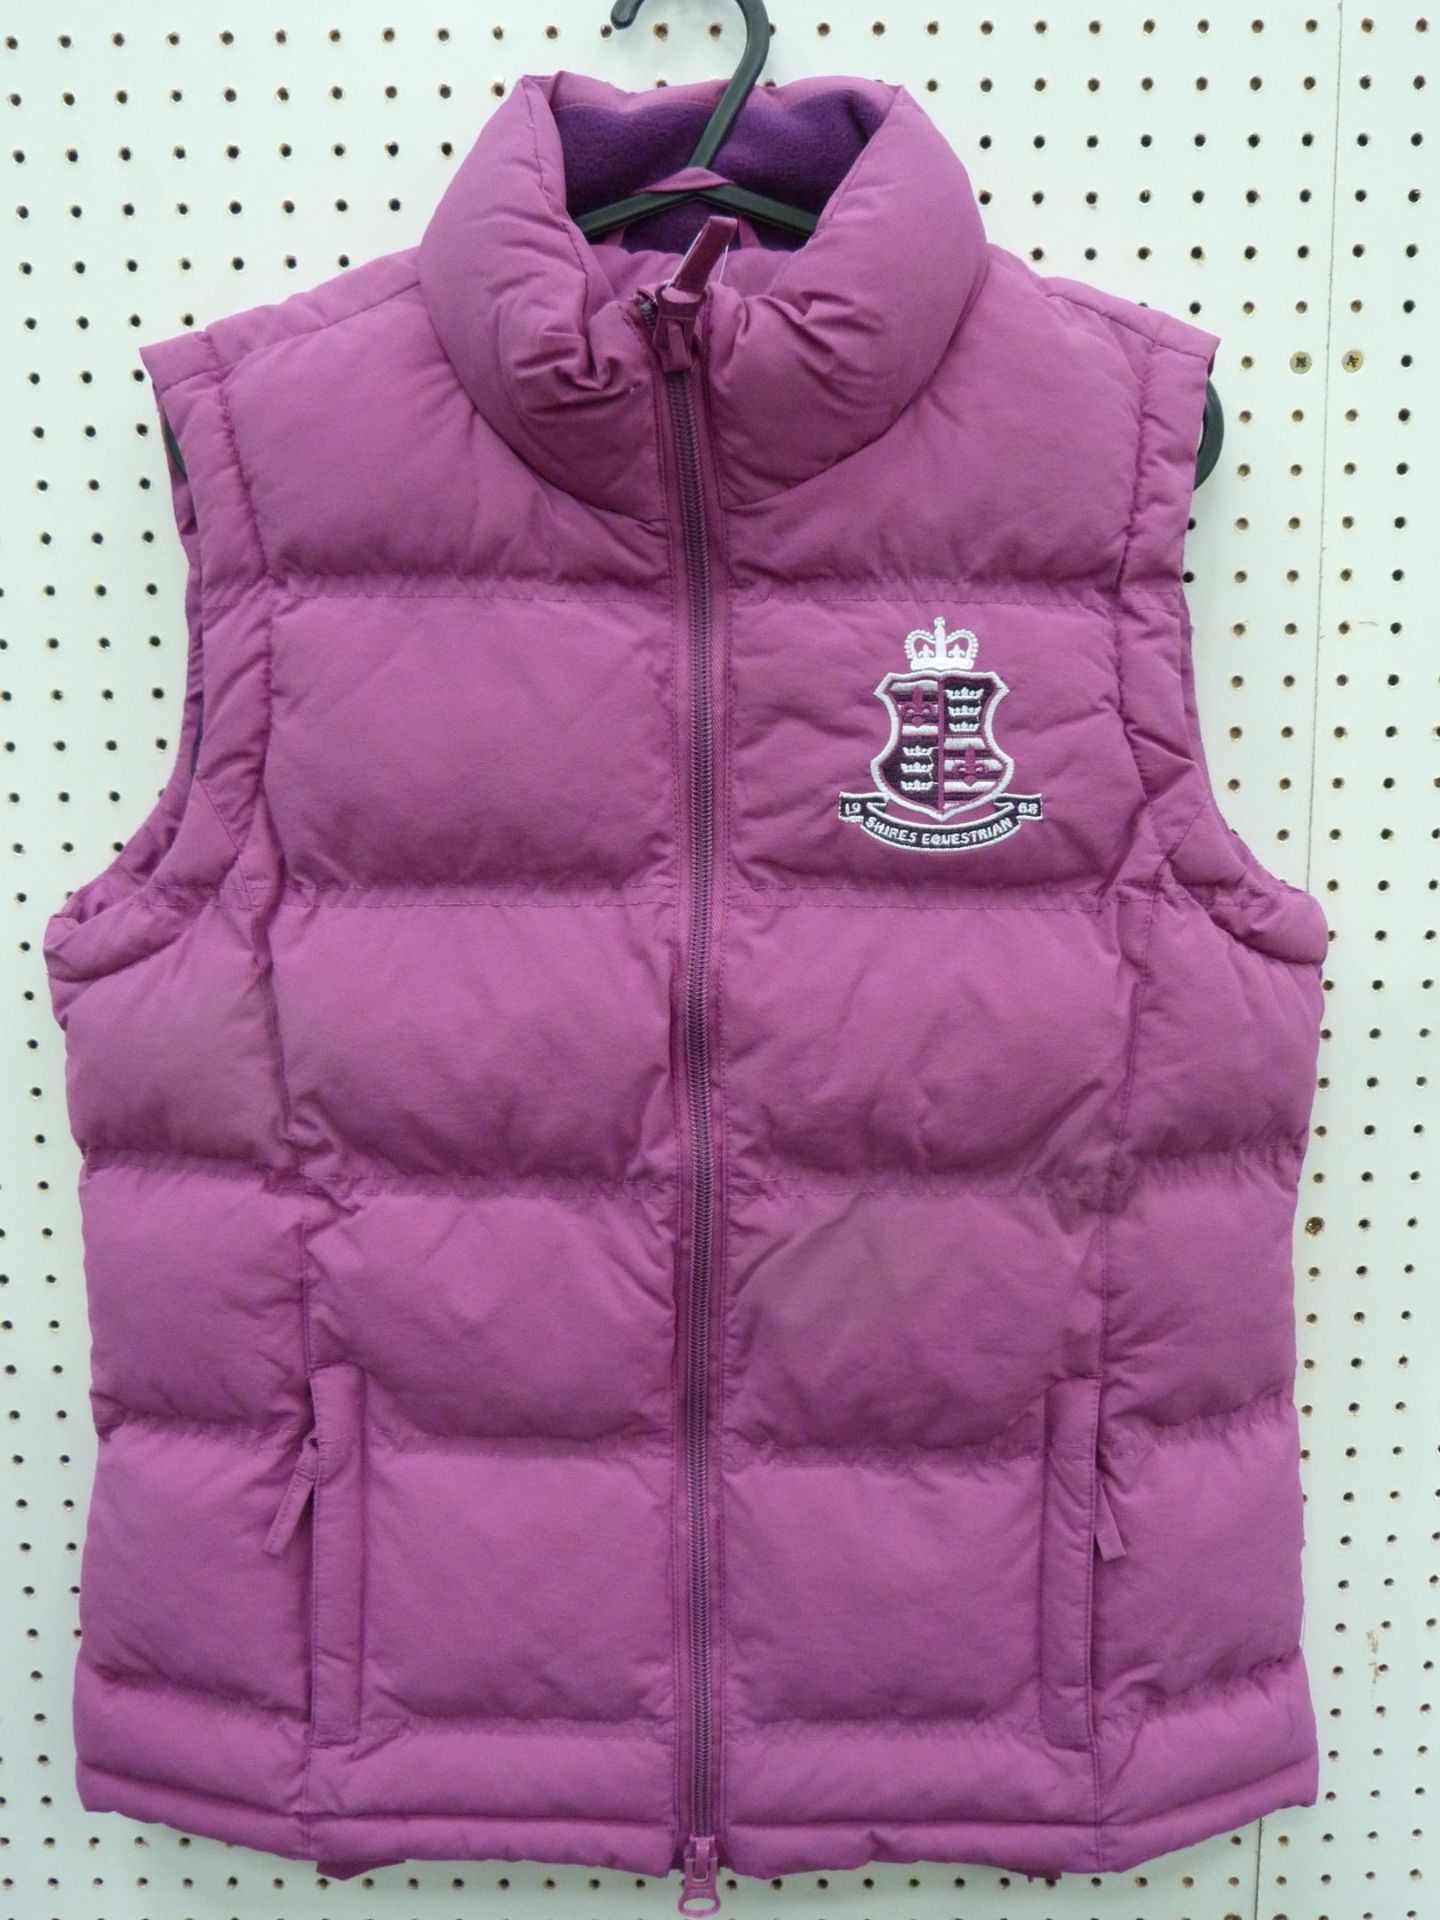 * Three Pink, New Shires Team Gilets, one Medium, one Large, one X Large RRP £99.95 (3)